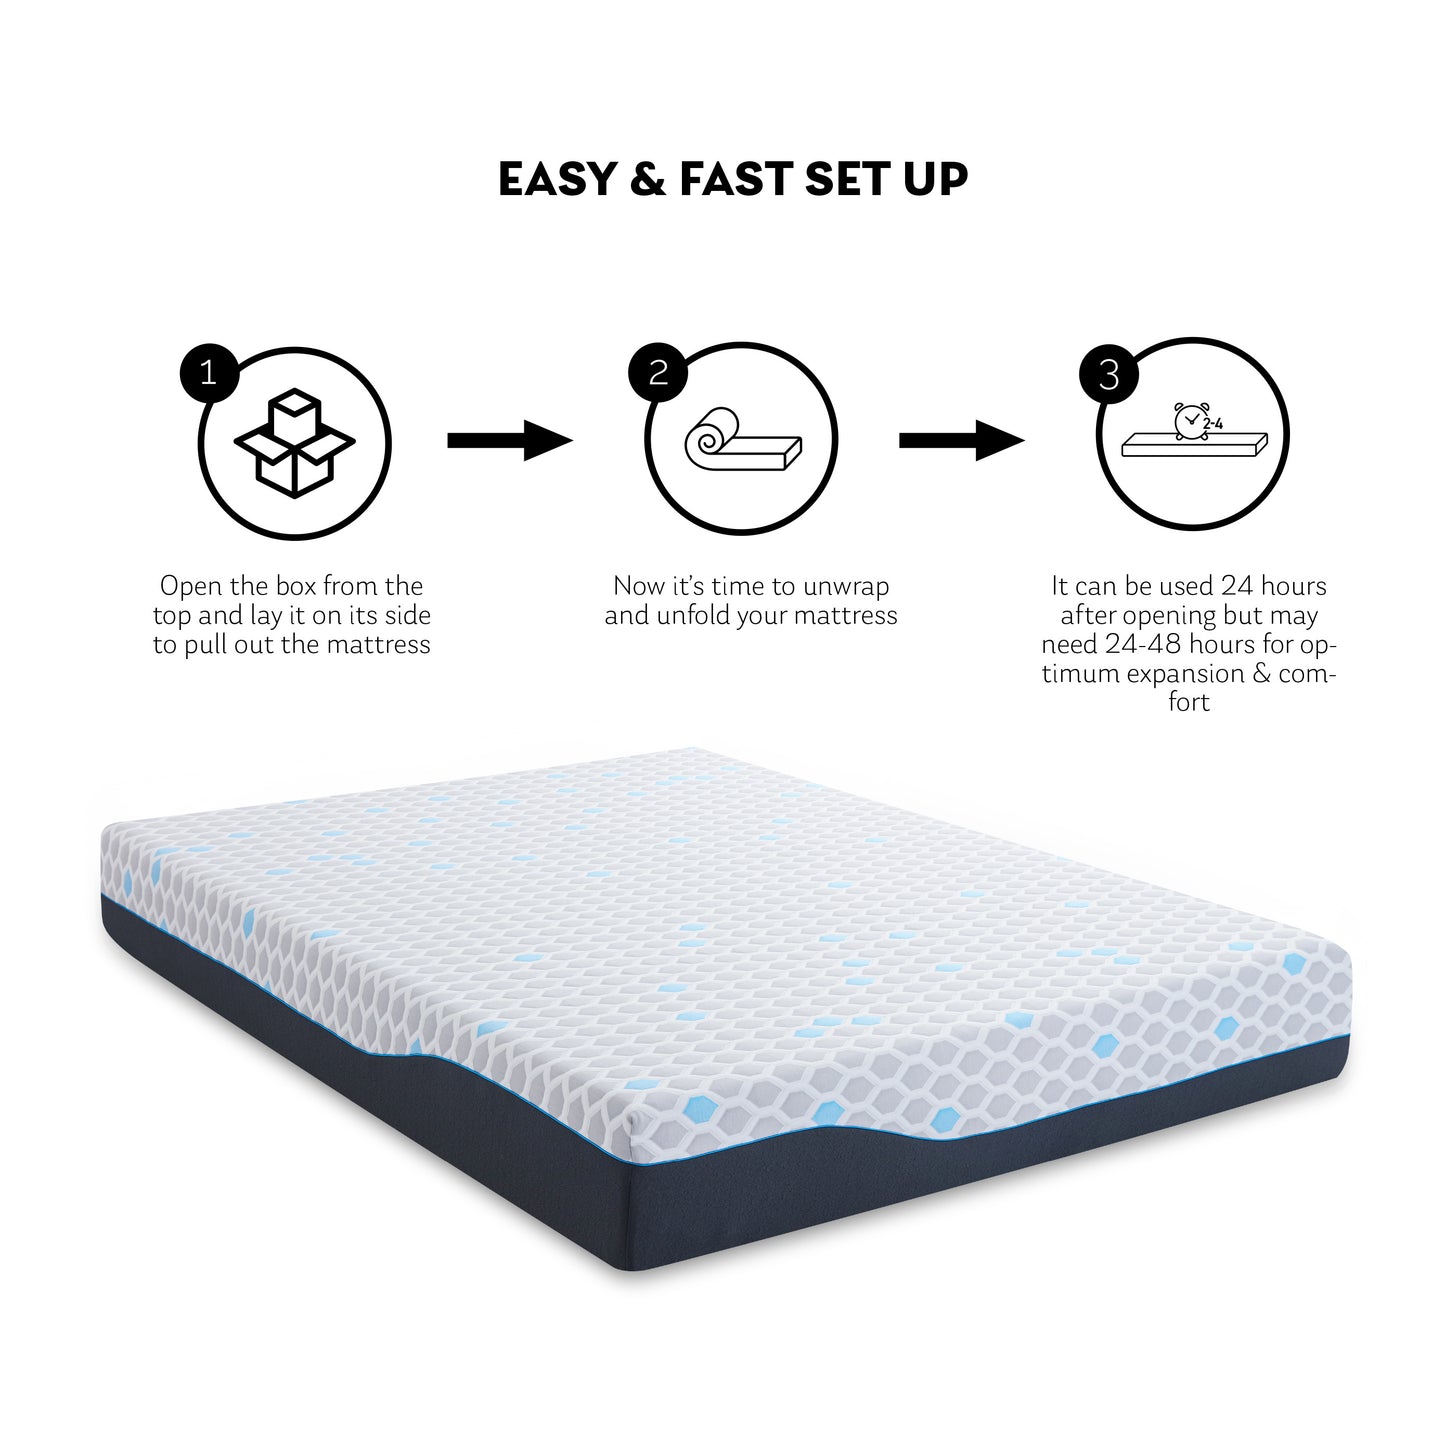 10 Inch King Size Memory Foam Mattress, Mattress in A Box, Gel Memory Foam Infused Bamboo Charcoal, CertiPUR-US Certified,Made in USA